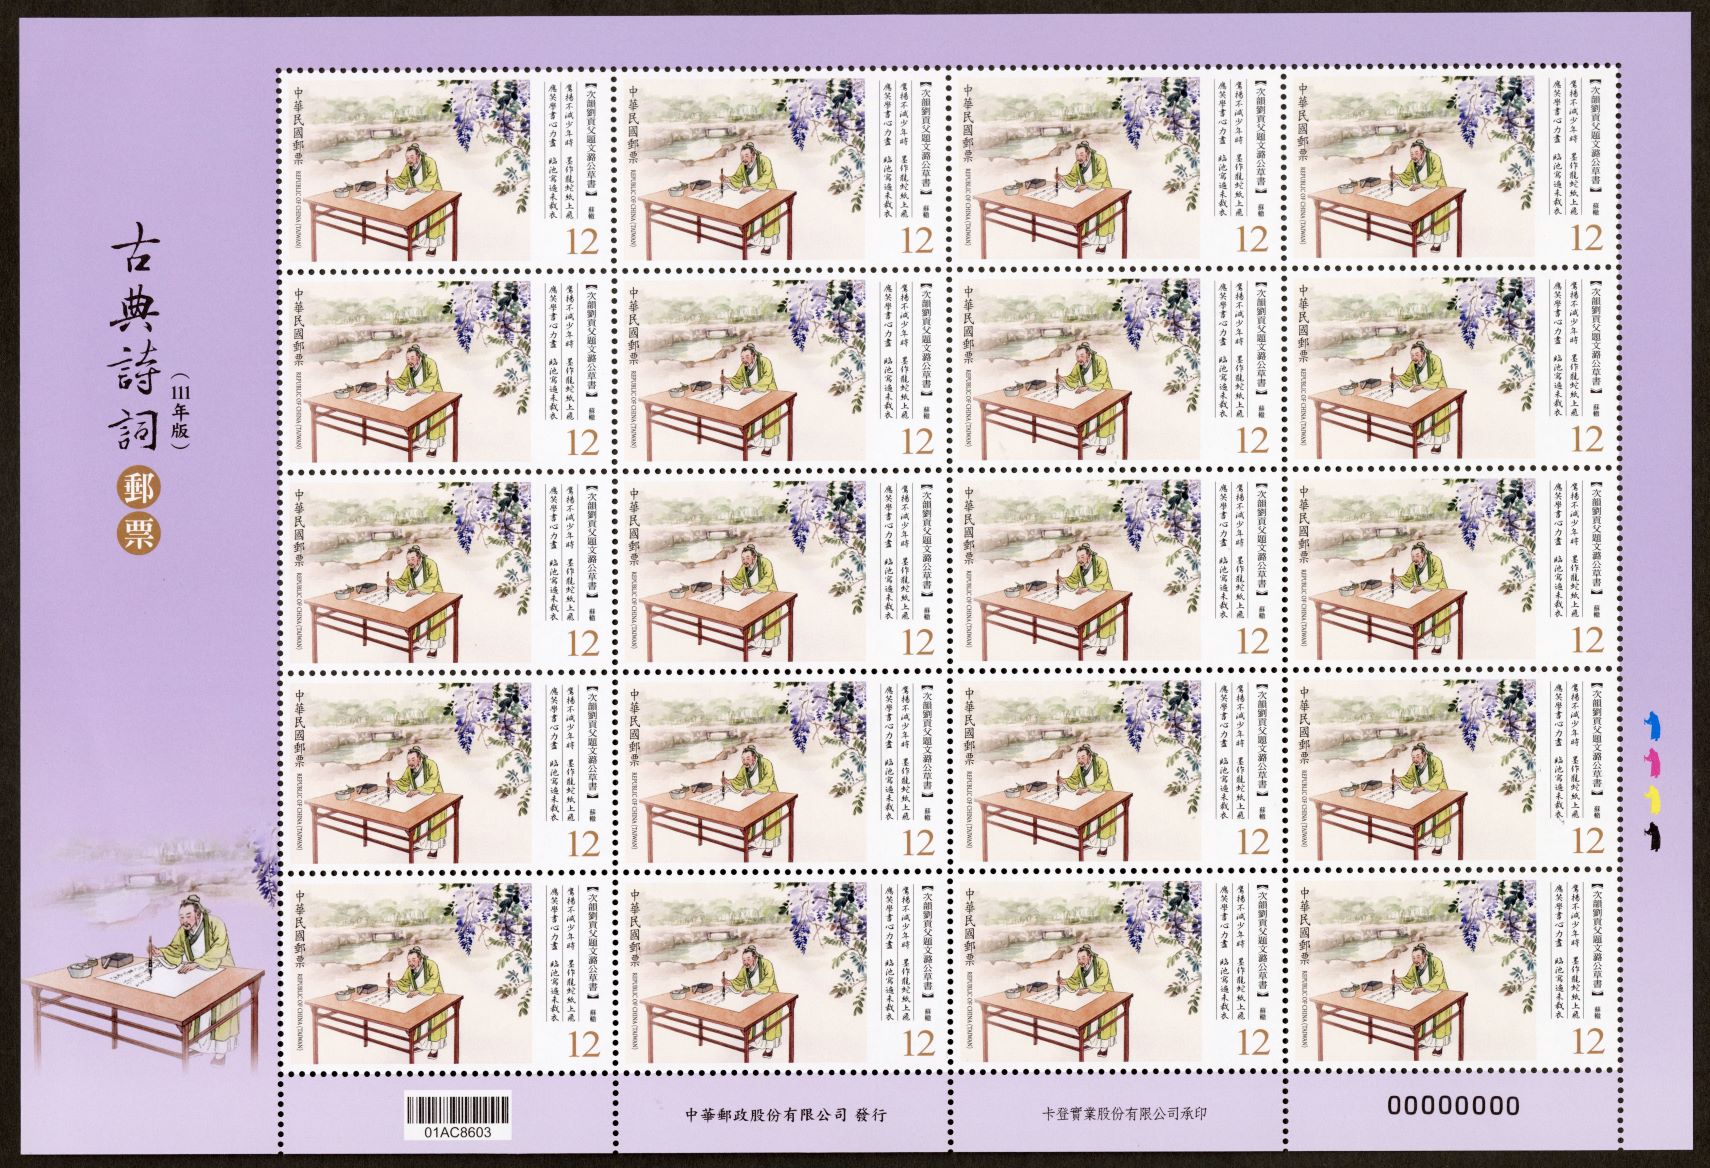 (Sp. 724.30)Sp.724 Classical Chinese Poetry Postage Stamps (Issue of 2022)